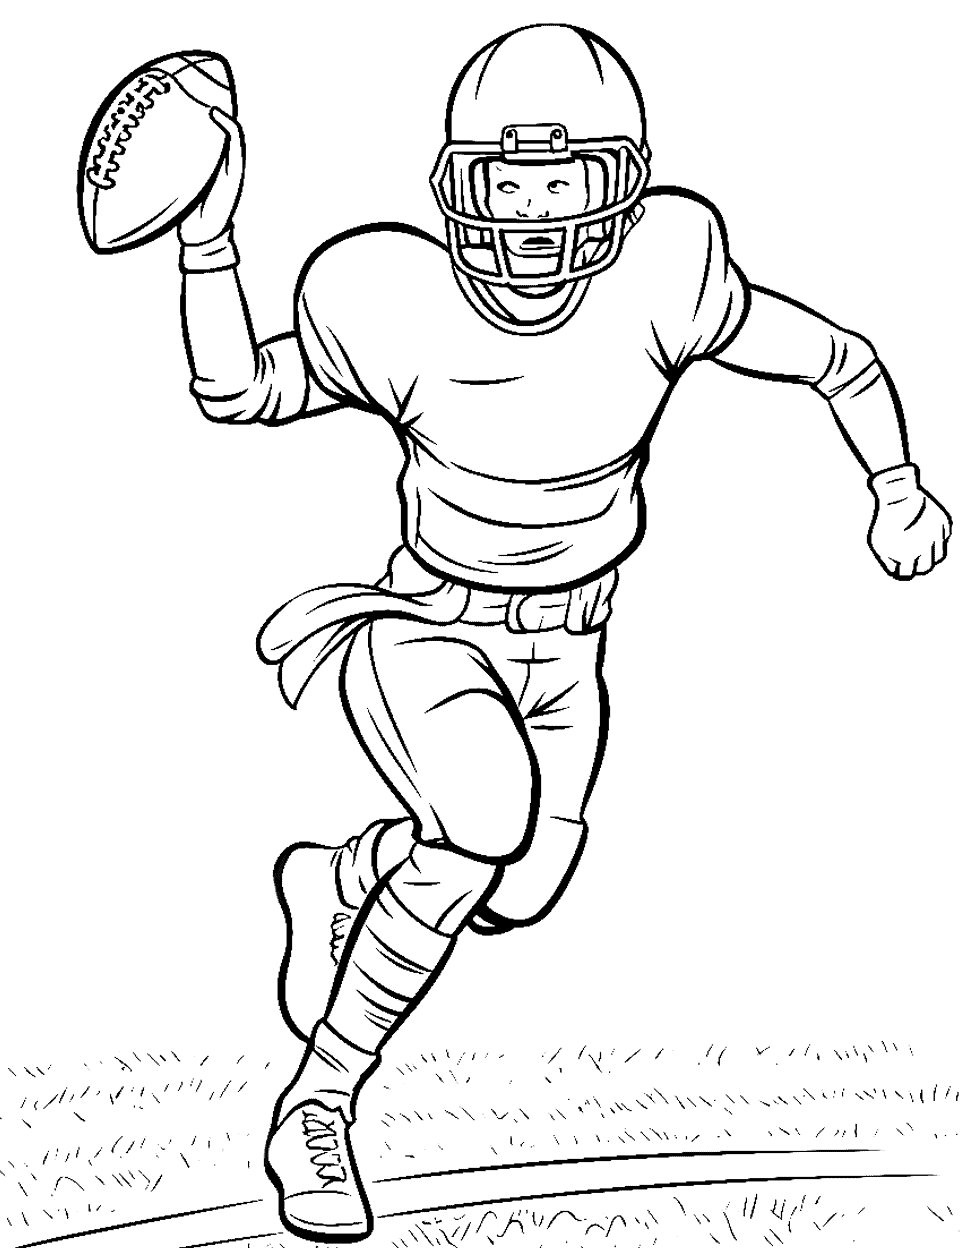 Fierce Pass Coloring Page - A player receiving a fierce pass, ready to score when it’s the right time.